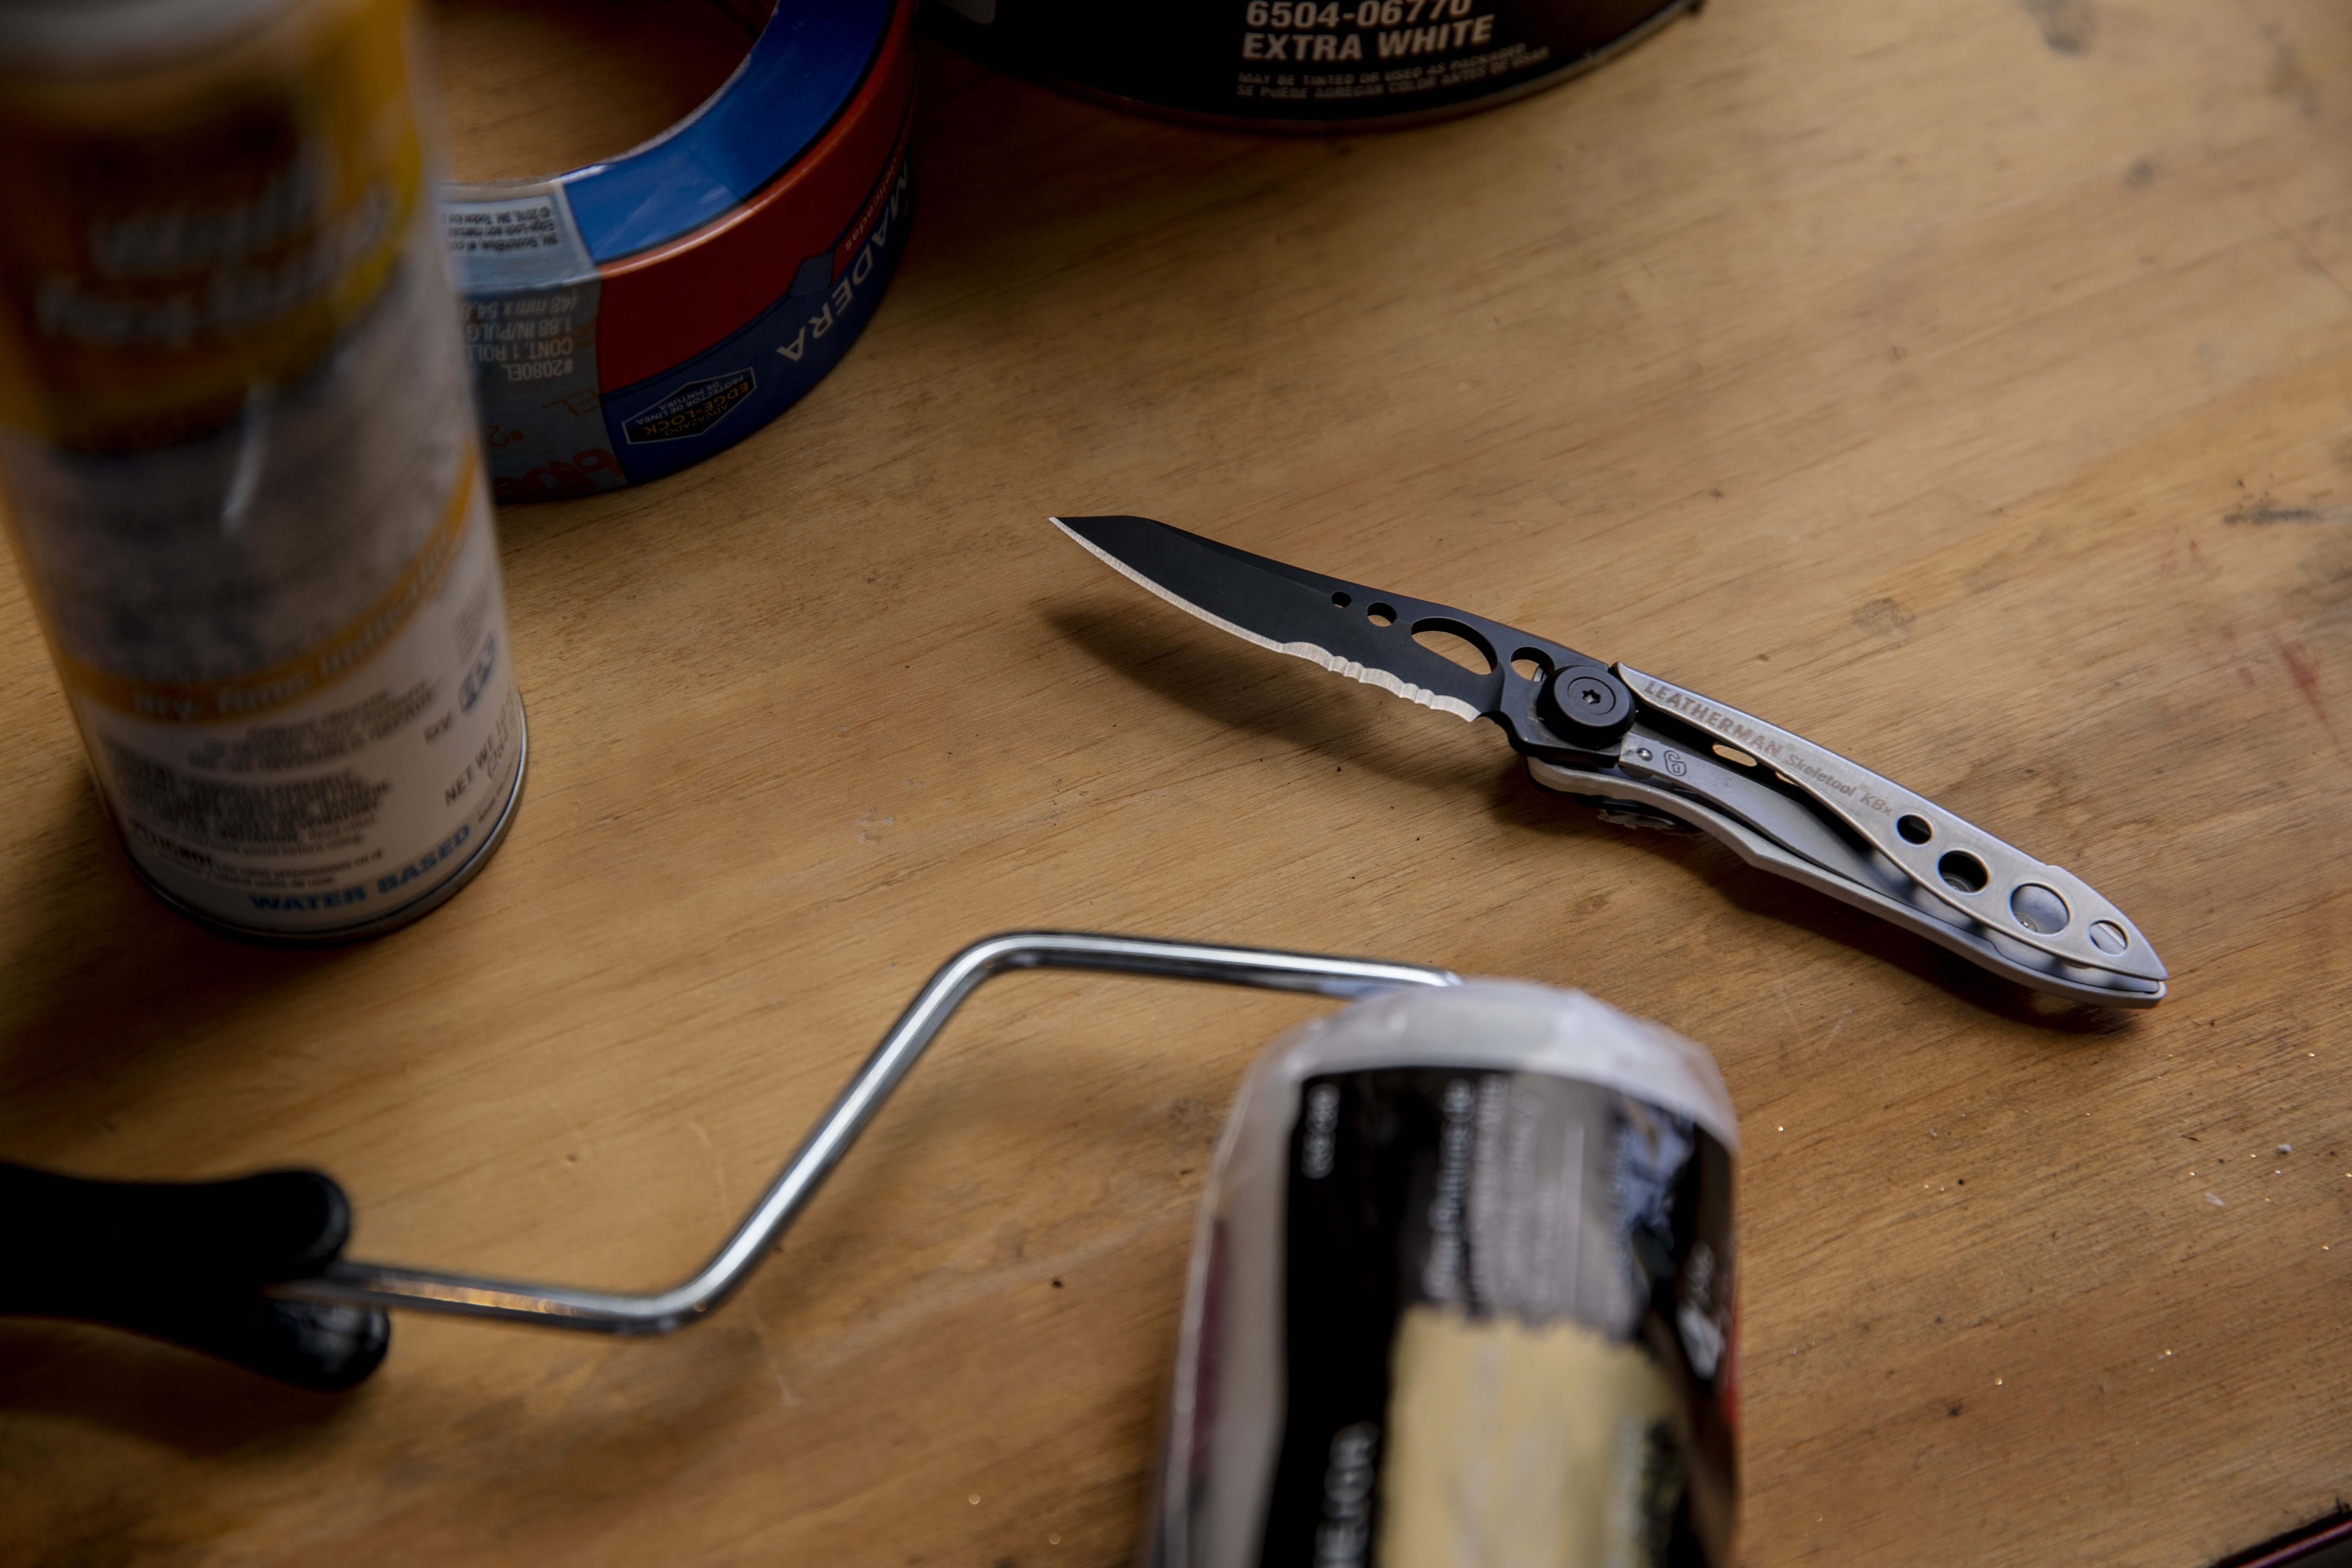 Black and Silver Skeletool KBX with open knife blade on wooden table